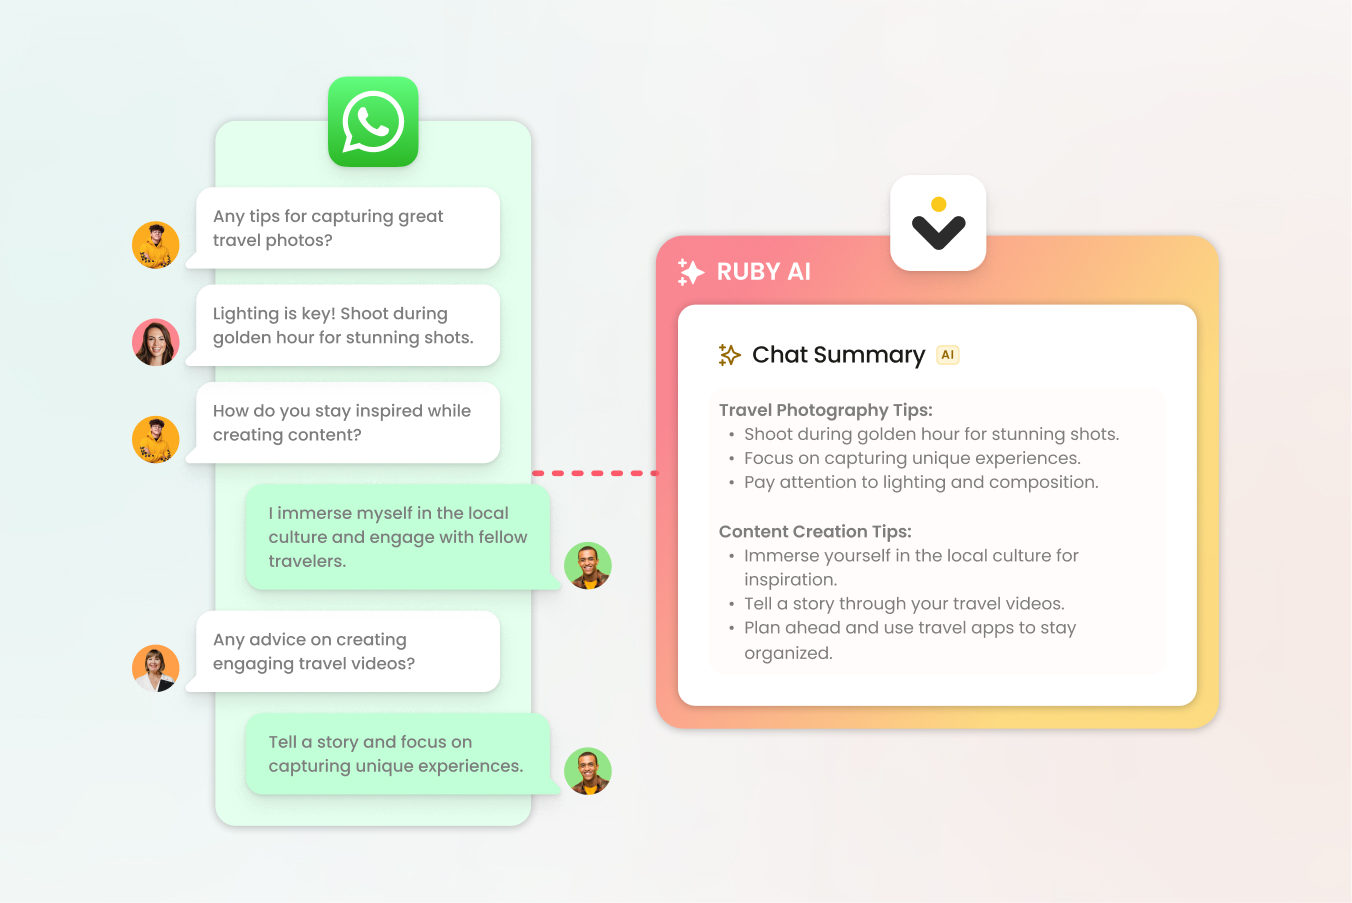 sample summary for ruby ai on whatsapp chats